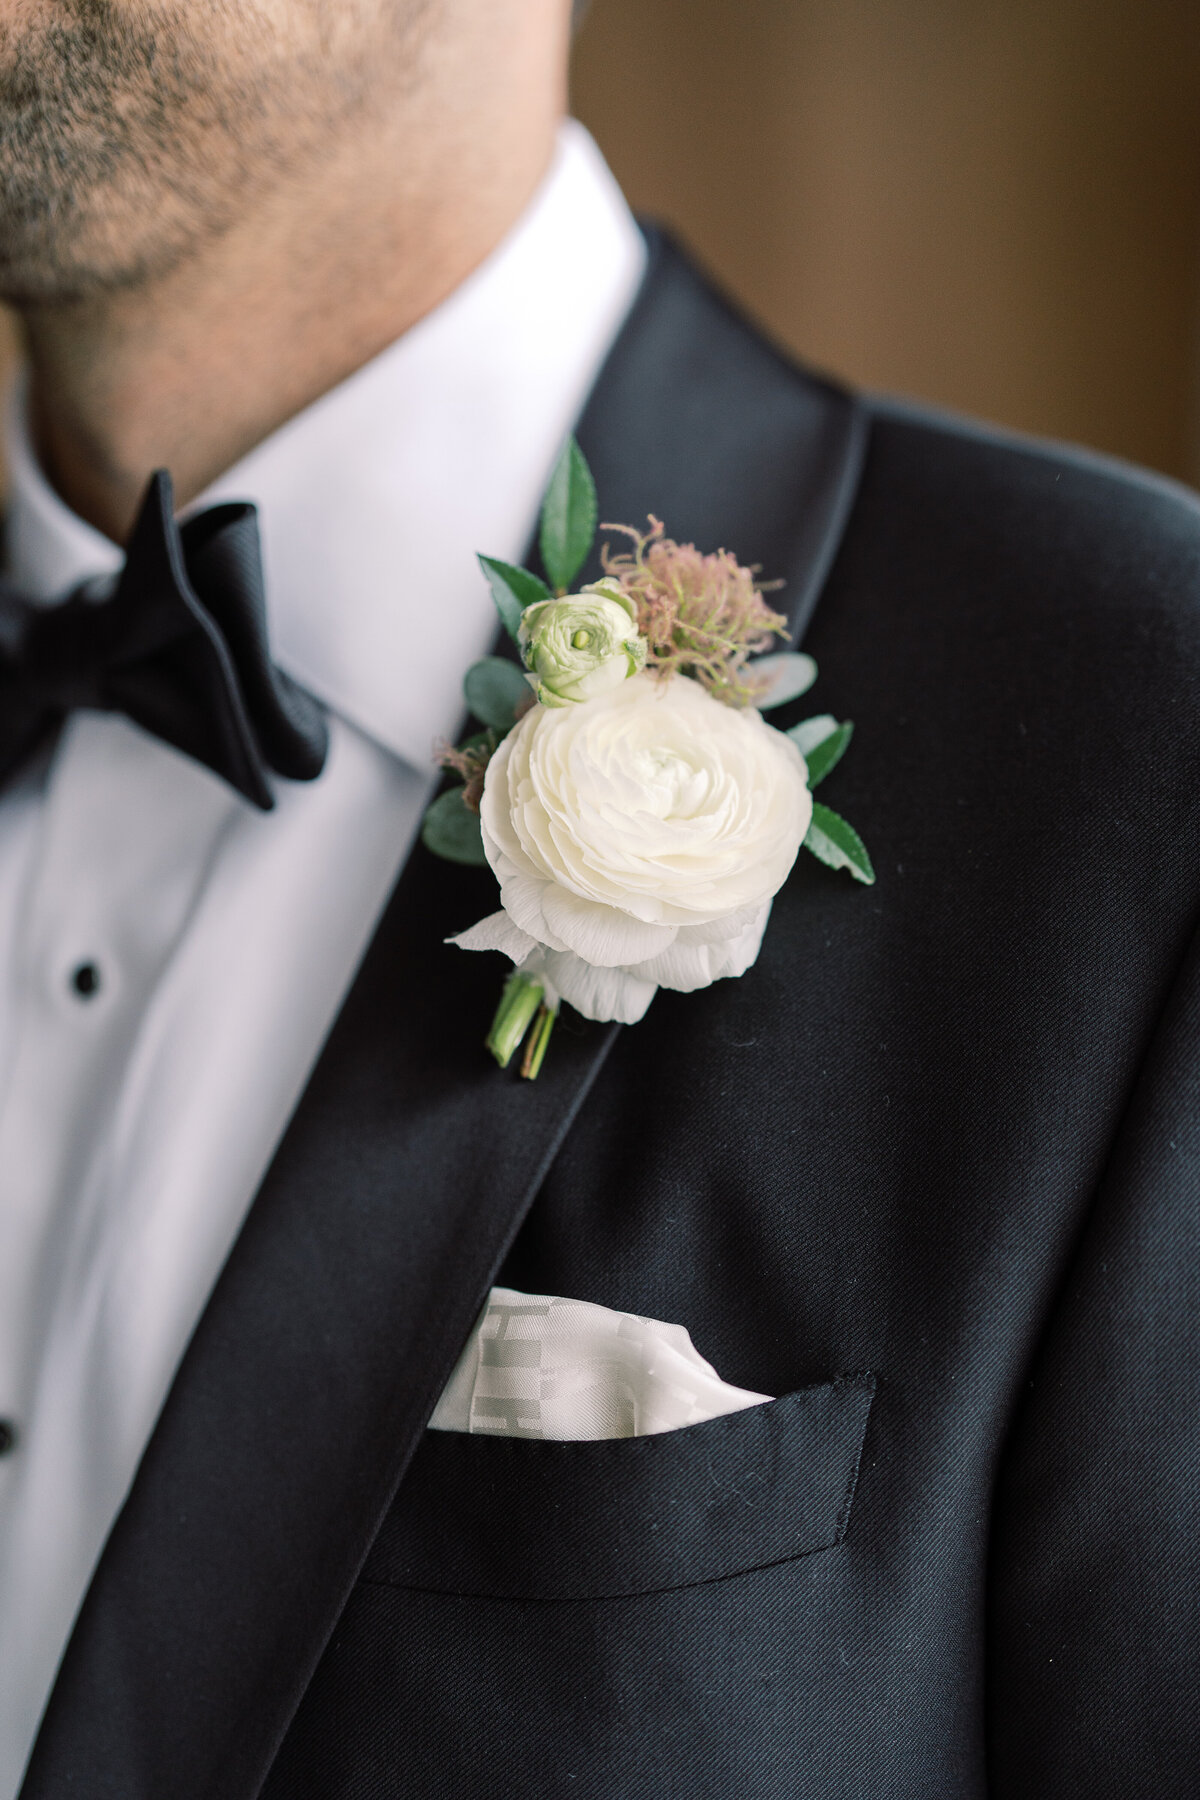 Classic white boutonniere for summer wedding in Tennessee. Cream, white, and green floral colors create a timeless look for this wedding in downtown Nashville. Design by Rosemary & Finch Floral Design in Nashville, TN.